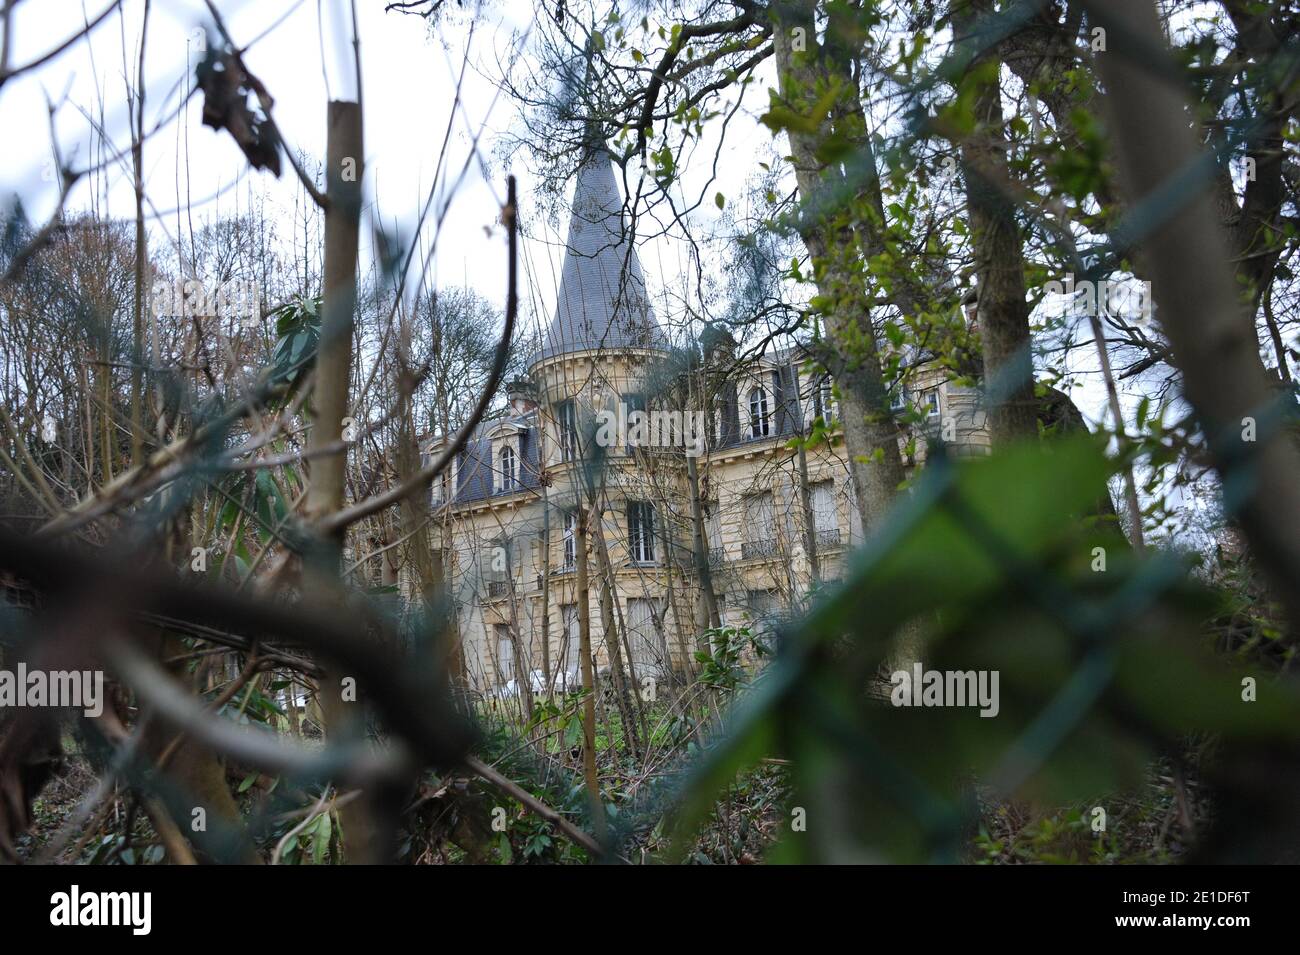 The African dictator Bokassa's castle in Hardricourt near Paris on January 13, 2011. The French castle that once belonged to African dictator Jean-Bedel Bokassa has sold for 915,000 euros.The dilapidated 'Chateau d'Hardricourt' was bought by an anonymous bidder at an auction in Versailles. Bokassa spent several years living in the mansion in the western Paris suburb of Hardricourt after he was overthrown as leader of the Central African Republic (CAR) in 1979. 'Electricity, water, heating - all need to be overhauled,' Pascal Koerfer, lawyer for the administrator of the Bokassa estate. The prop Stock Photo